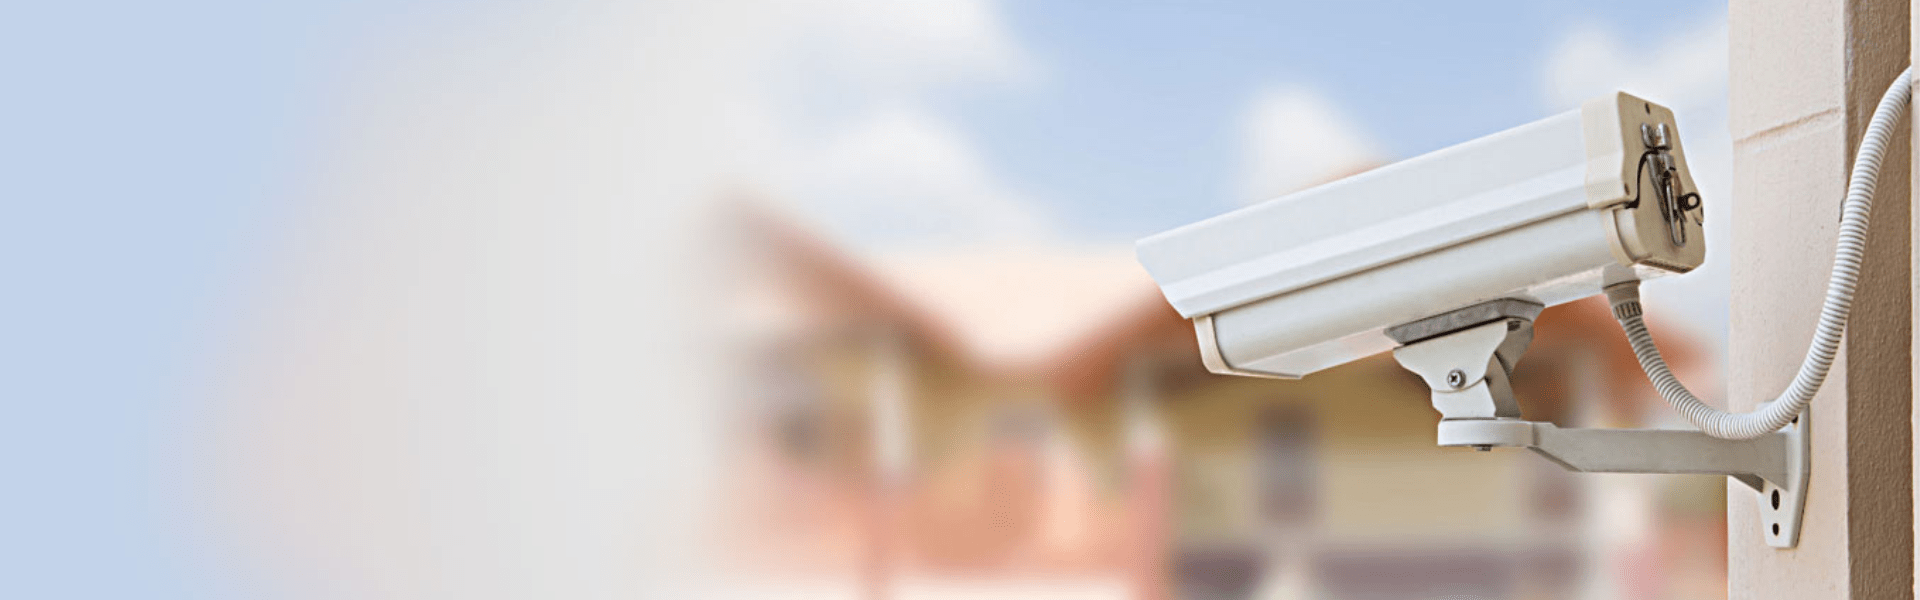 How to choose cctv camera for your home? 